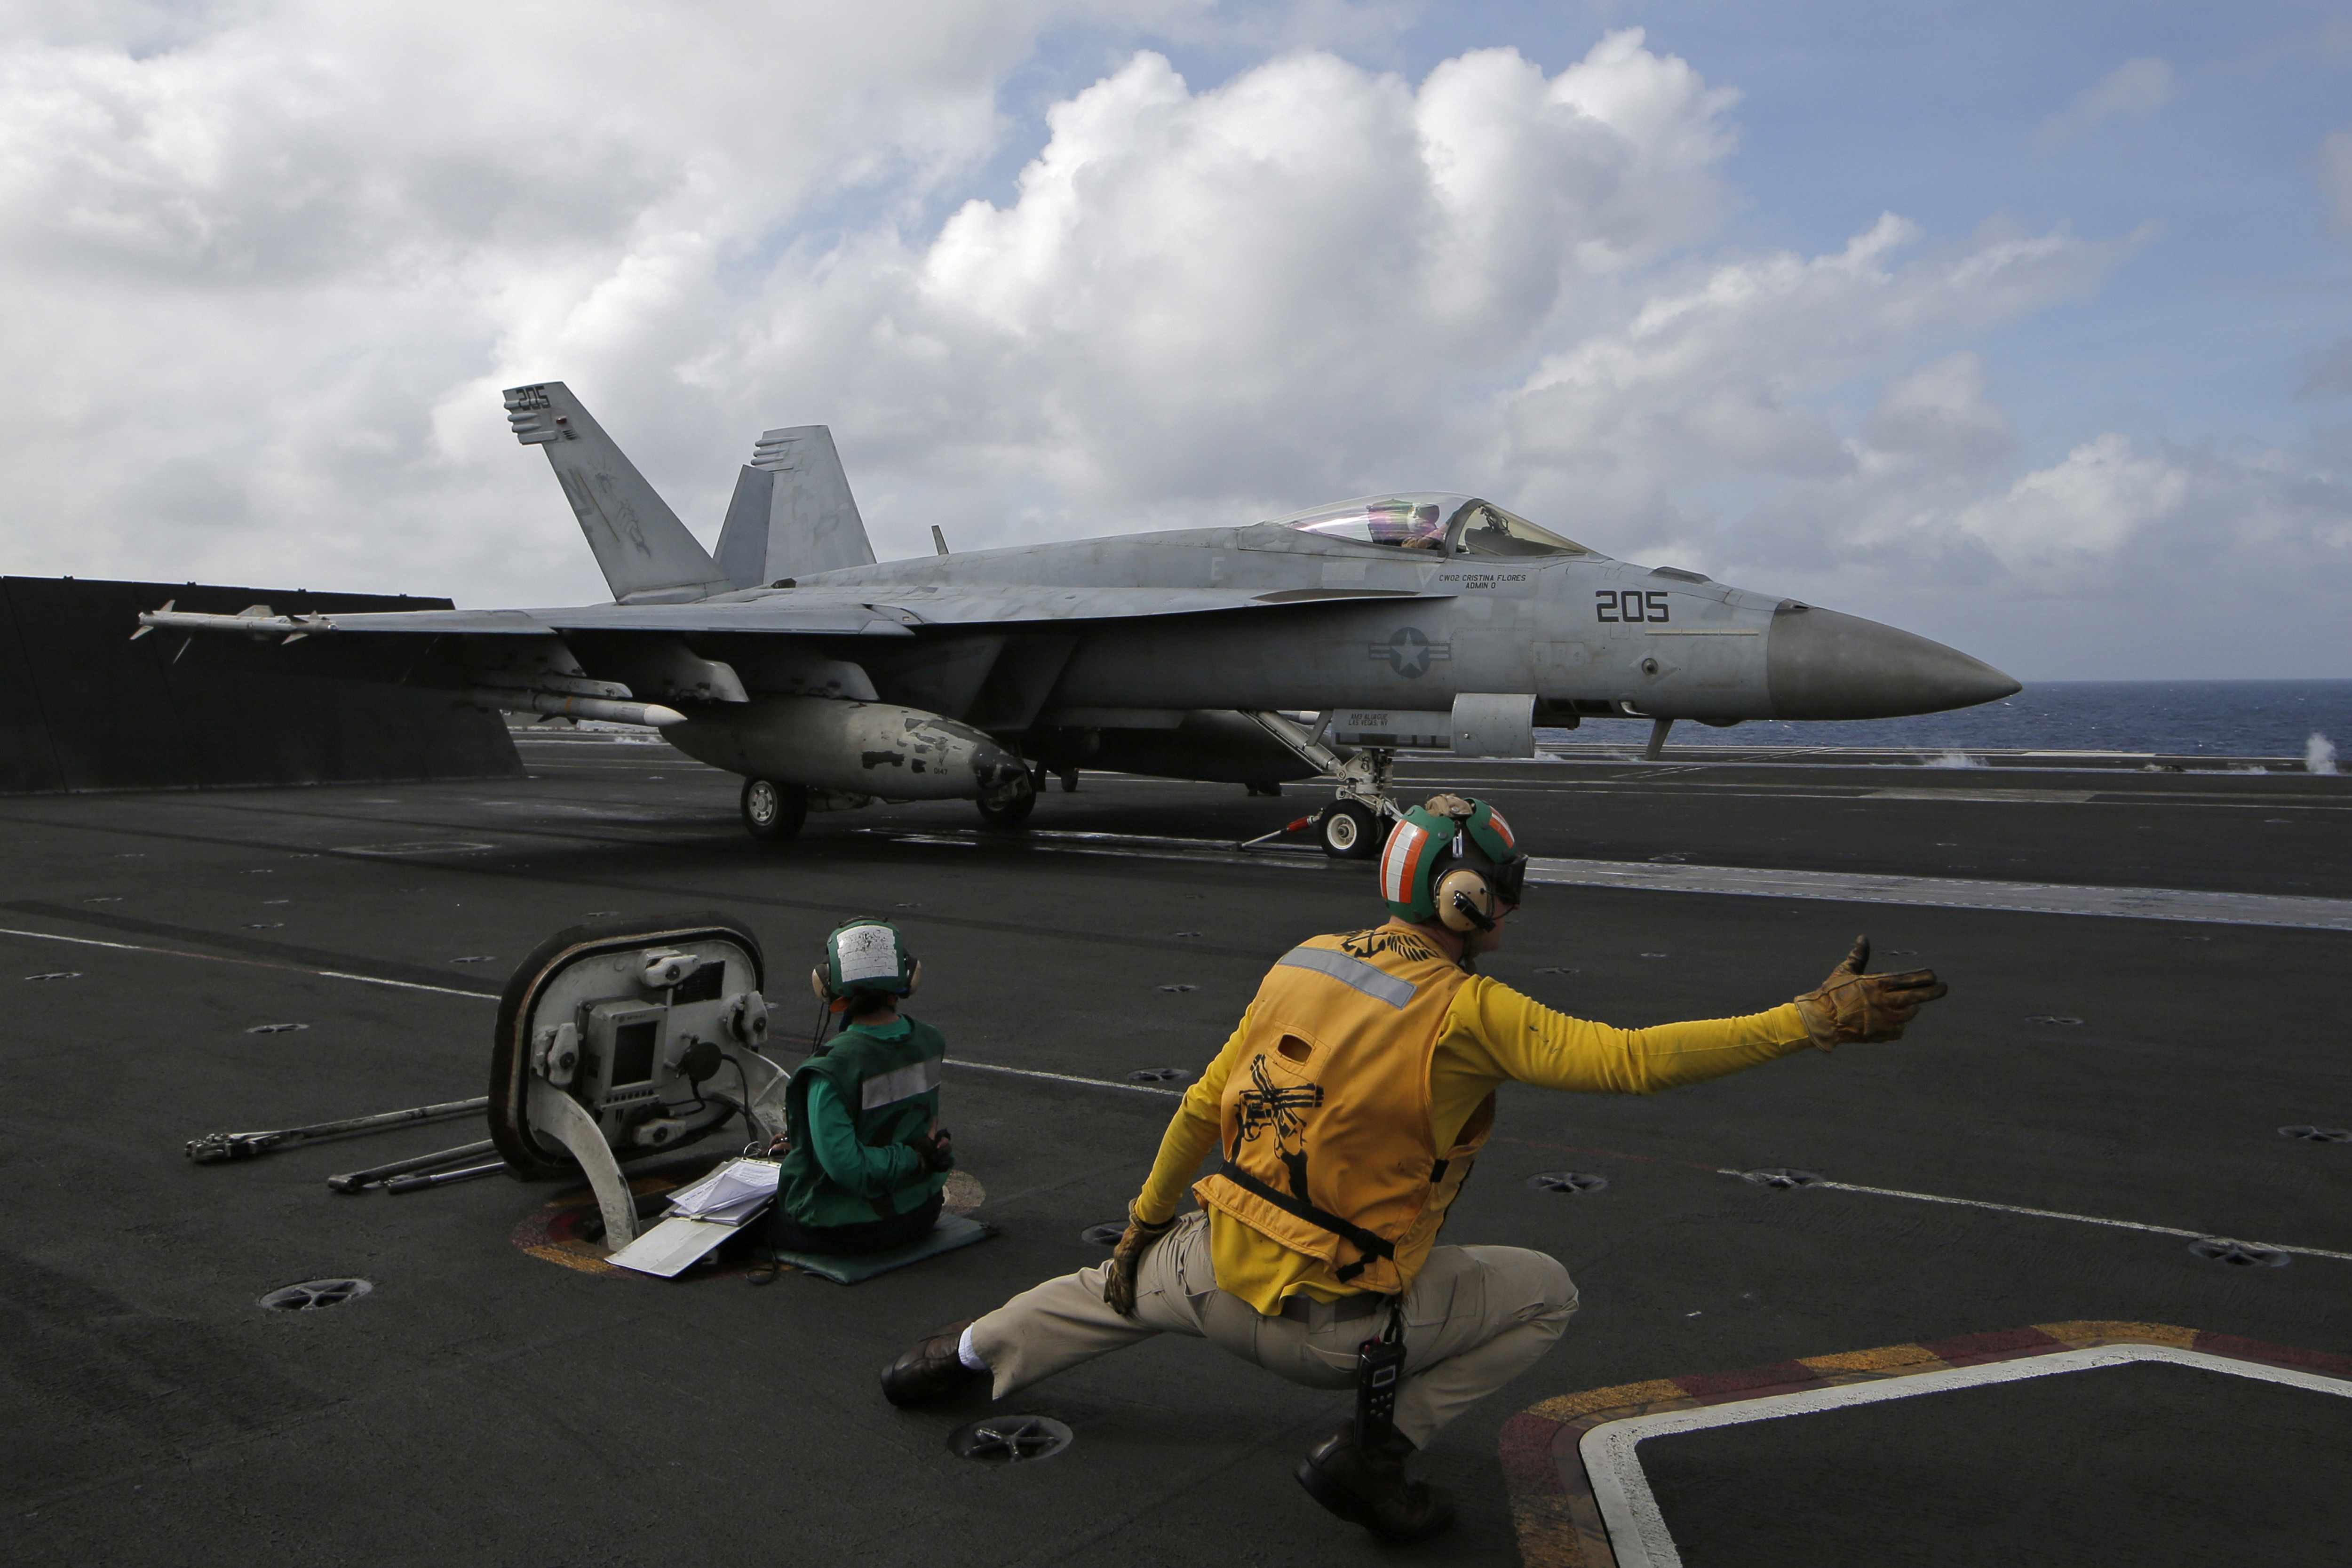 An F/A-18 Super Hornet fighter jet prepares to takes off on the deck of the U.S. Navy USS Ronald Reagan in the South China Sea, Tuesday, Nov. 20, 2018. China is allowing a U.S. Navy aircraft carrier and its battle group to make a port call in Hong Kong after it turned down similar request amid tensions with Washington.  (AP Photo/Kin Cheung)